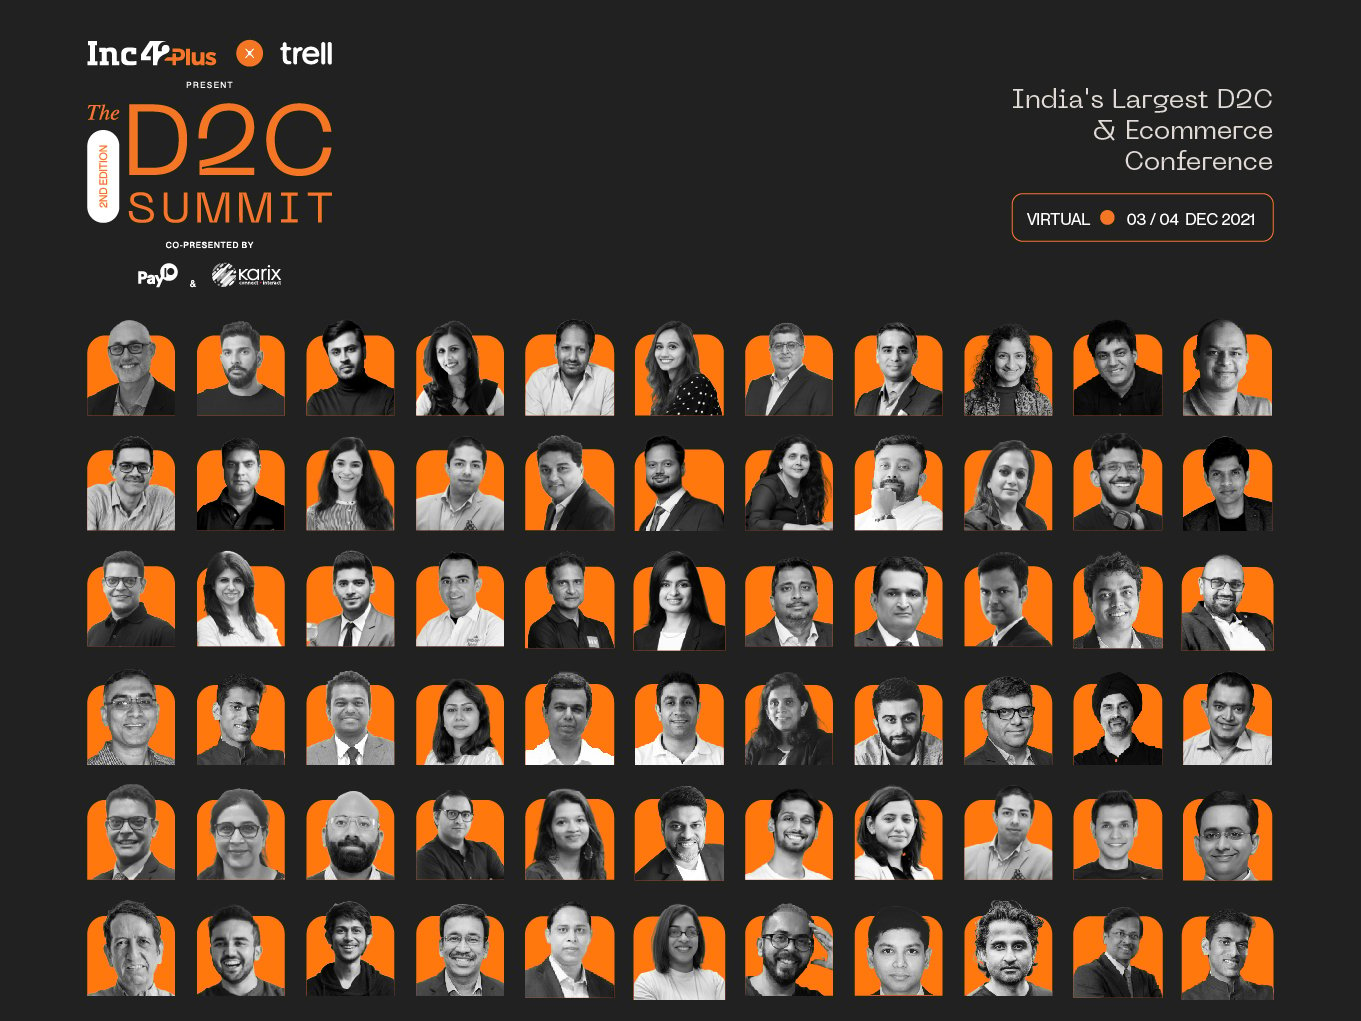 The D2C Summit Is Here! Unveiling The Agenda For India’s Largest D2C & Ecommerce Conference